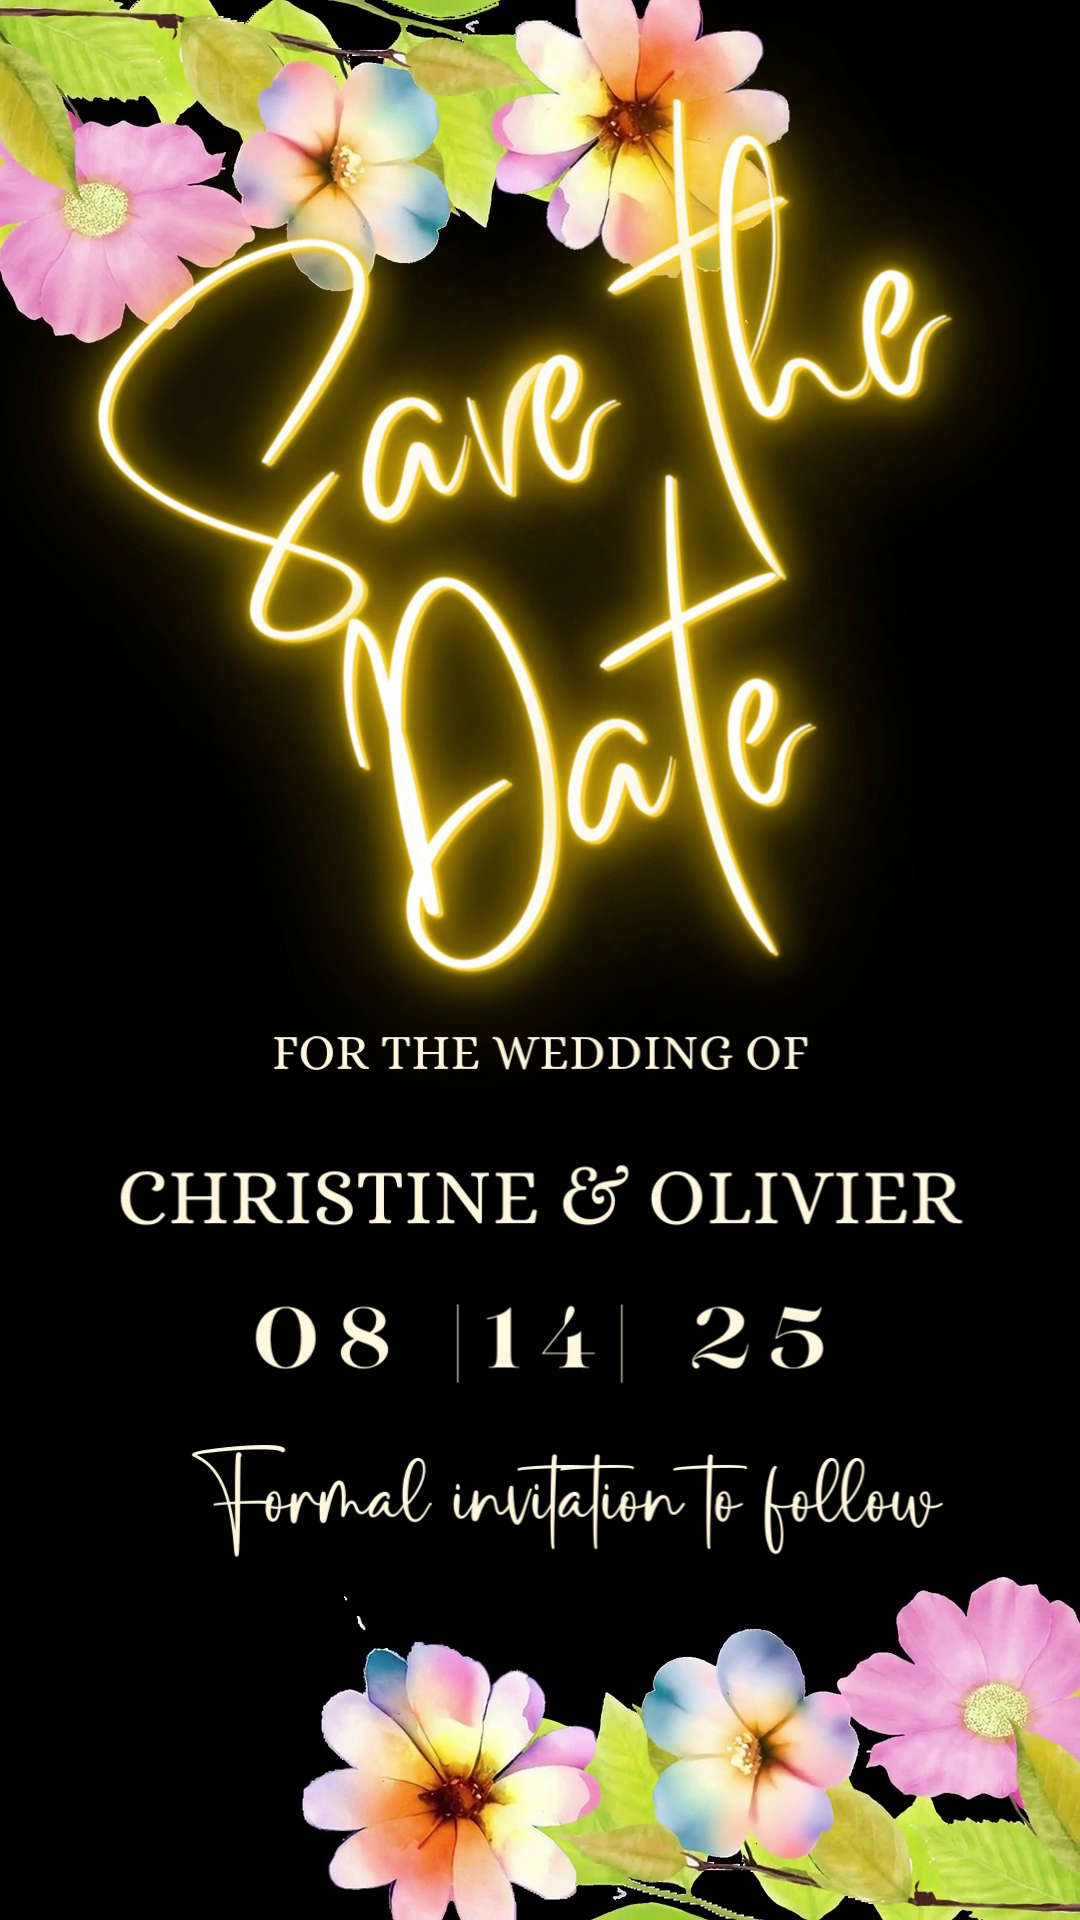 Floral Black Greenery Save The Date Video Invitation featuring colorful flowers on a black background, customizable with text and music using Canva, ideal for digital event invites.